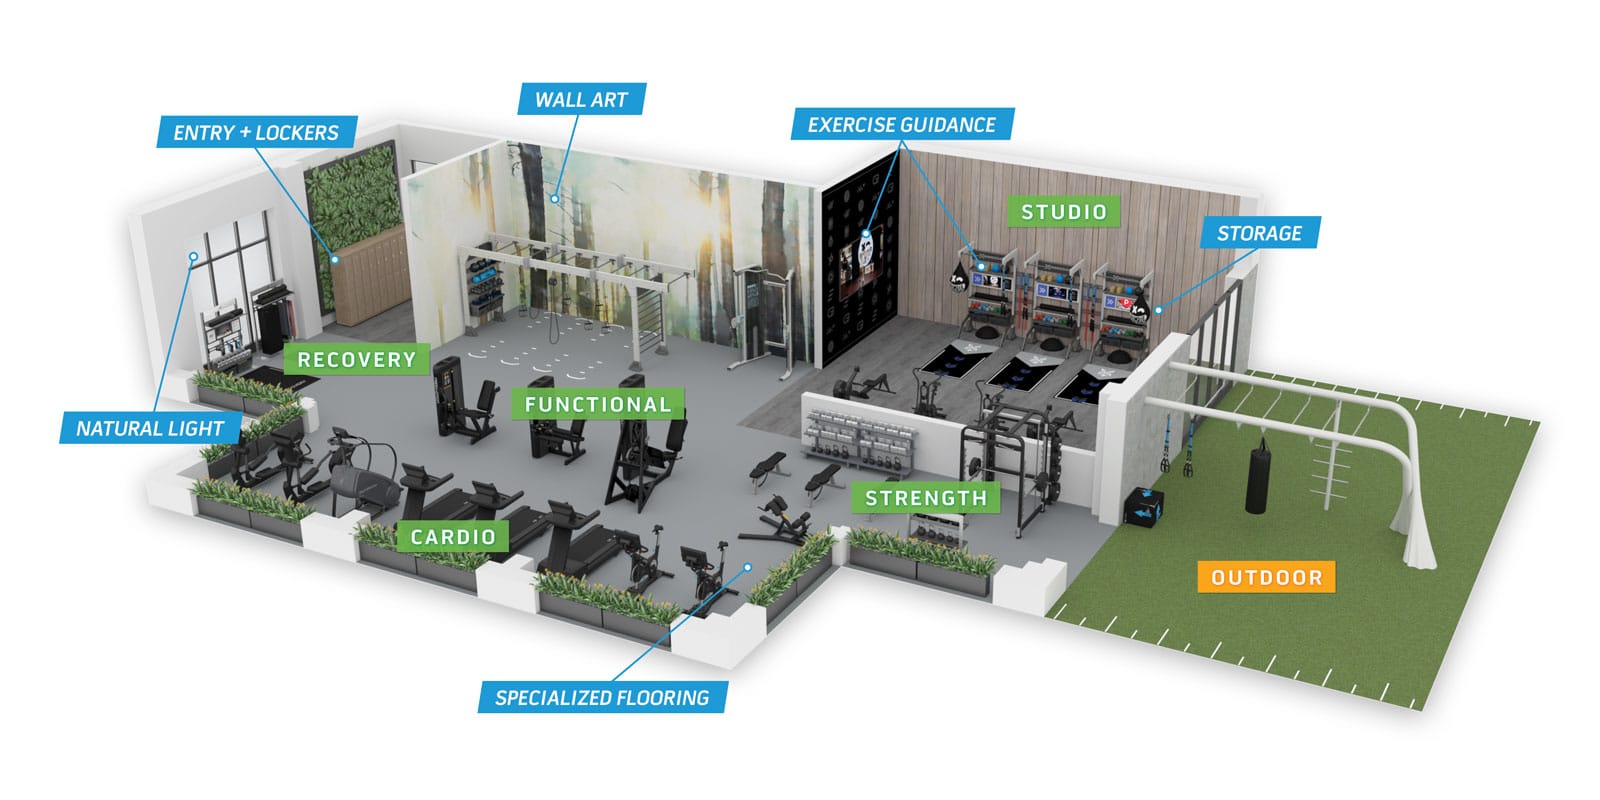 3D gym floor plan design with various fitness zones like functional, cardio, strength, recovery and more.